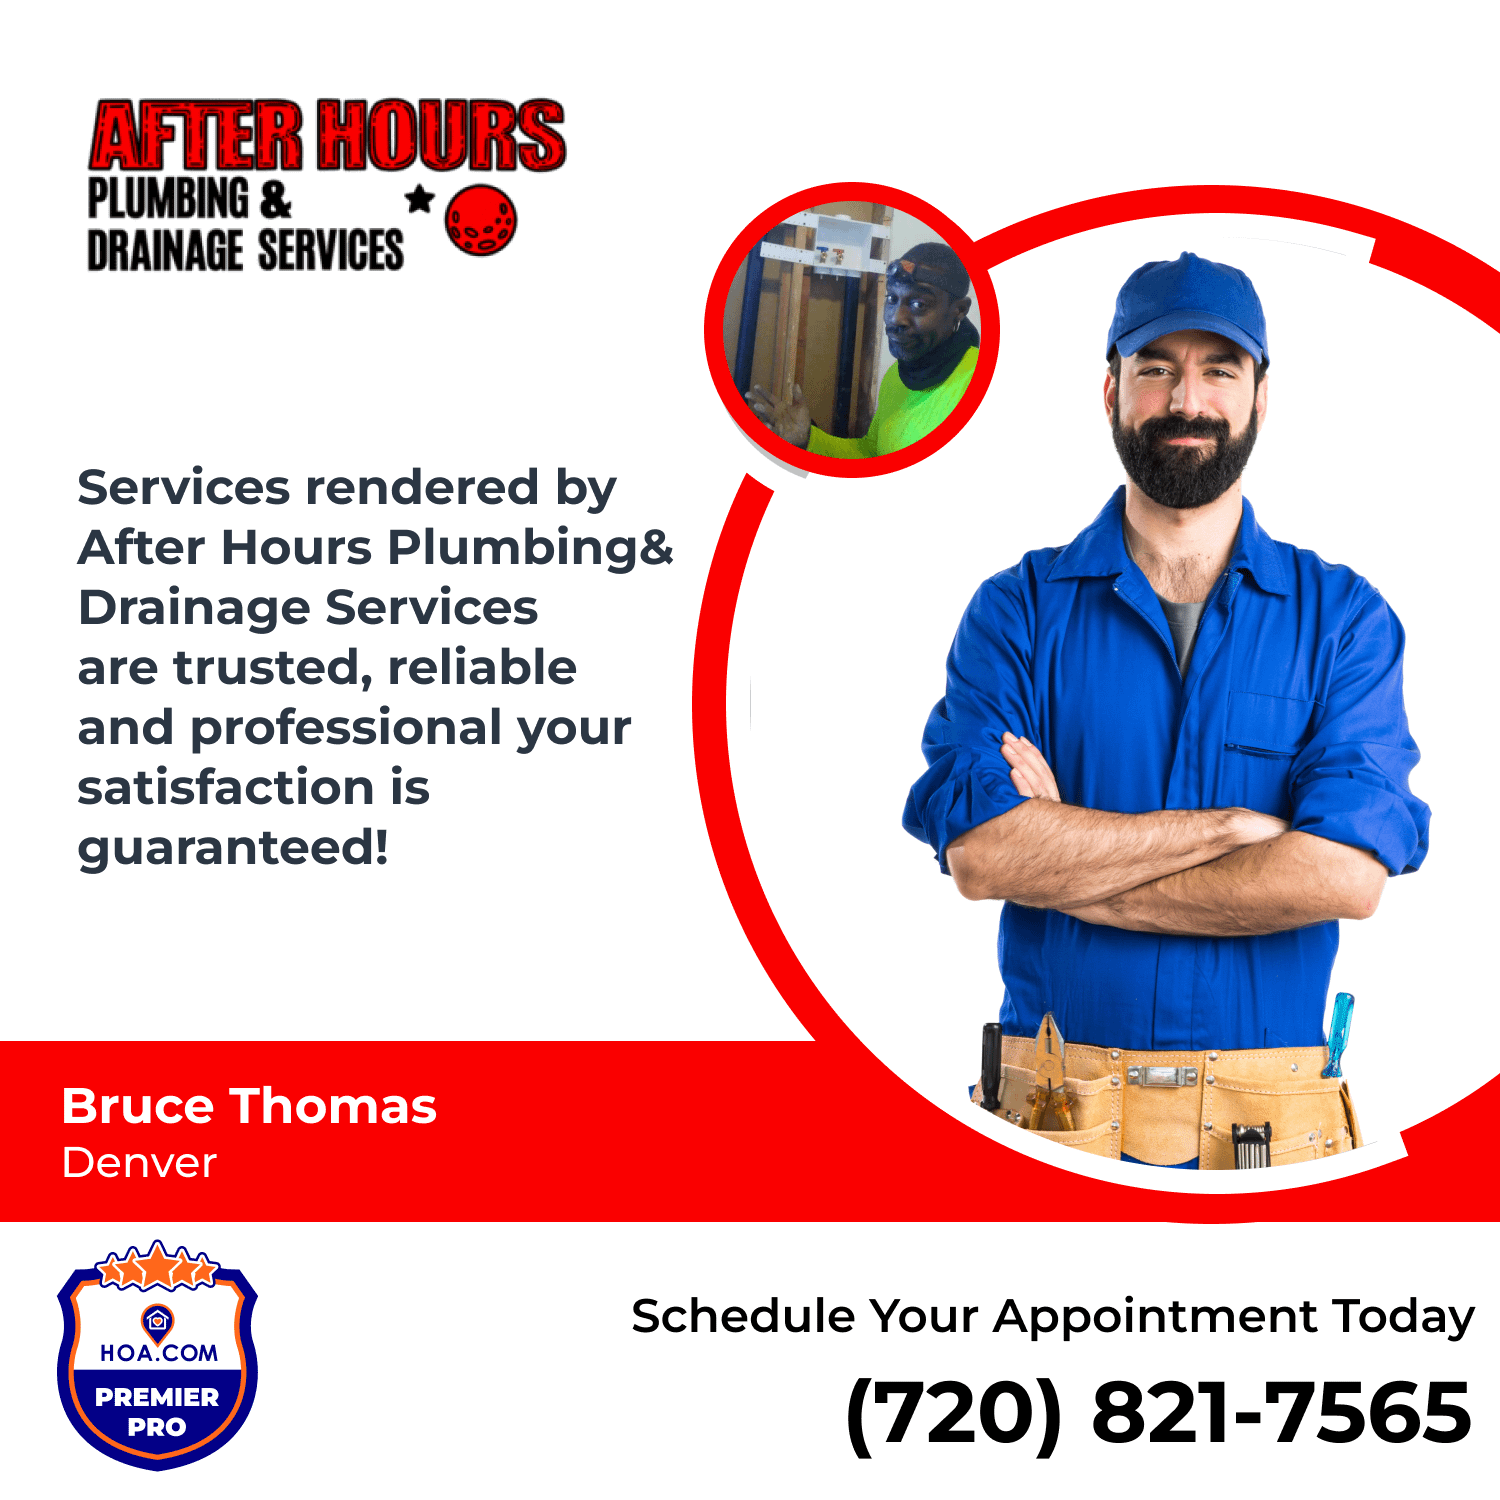 Service rendered by After Hours Plumbing & Drainage Services